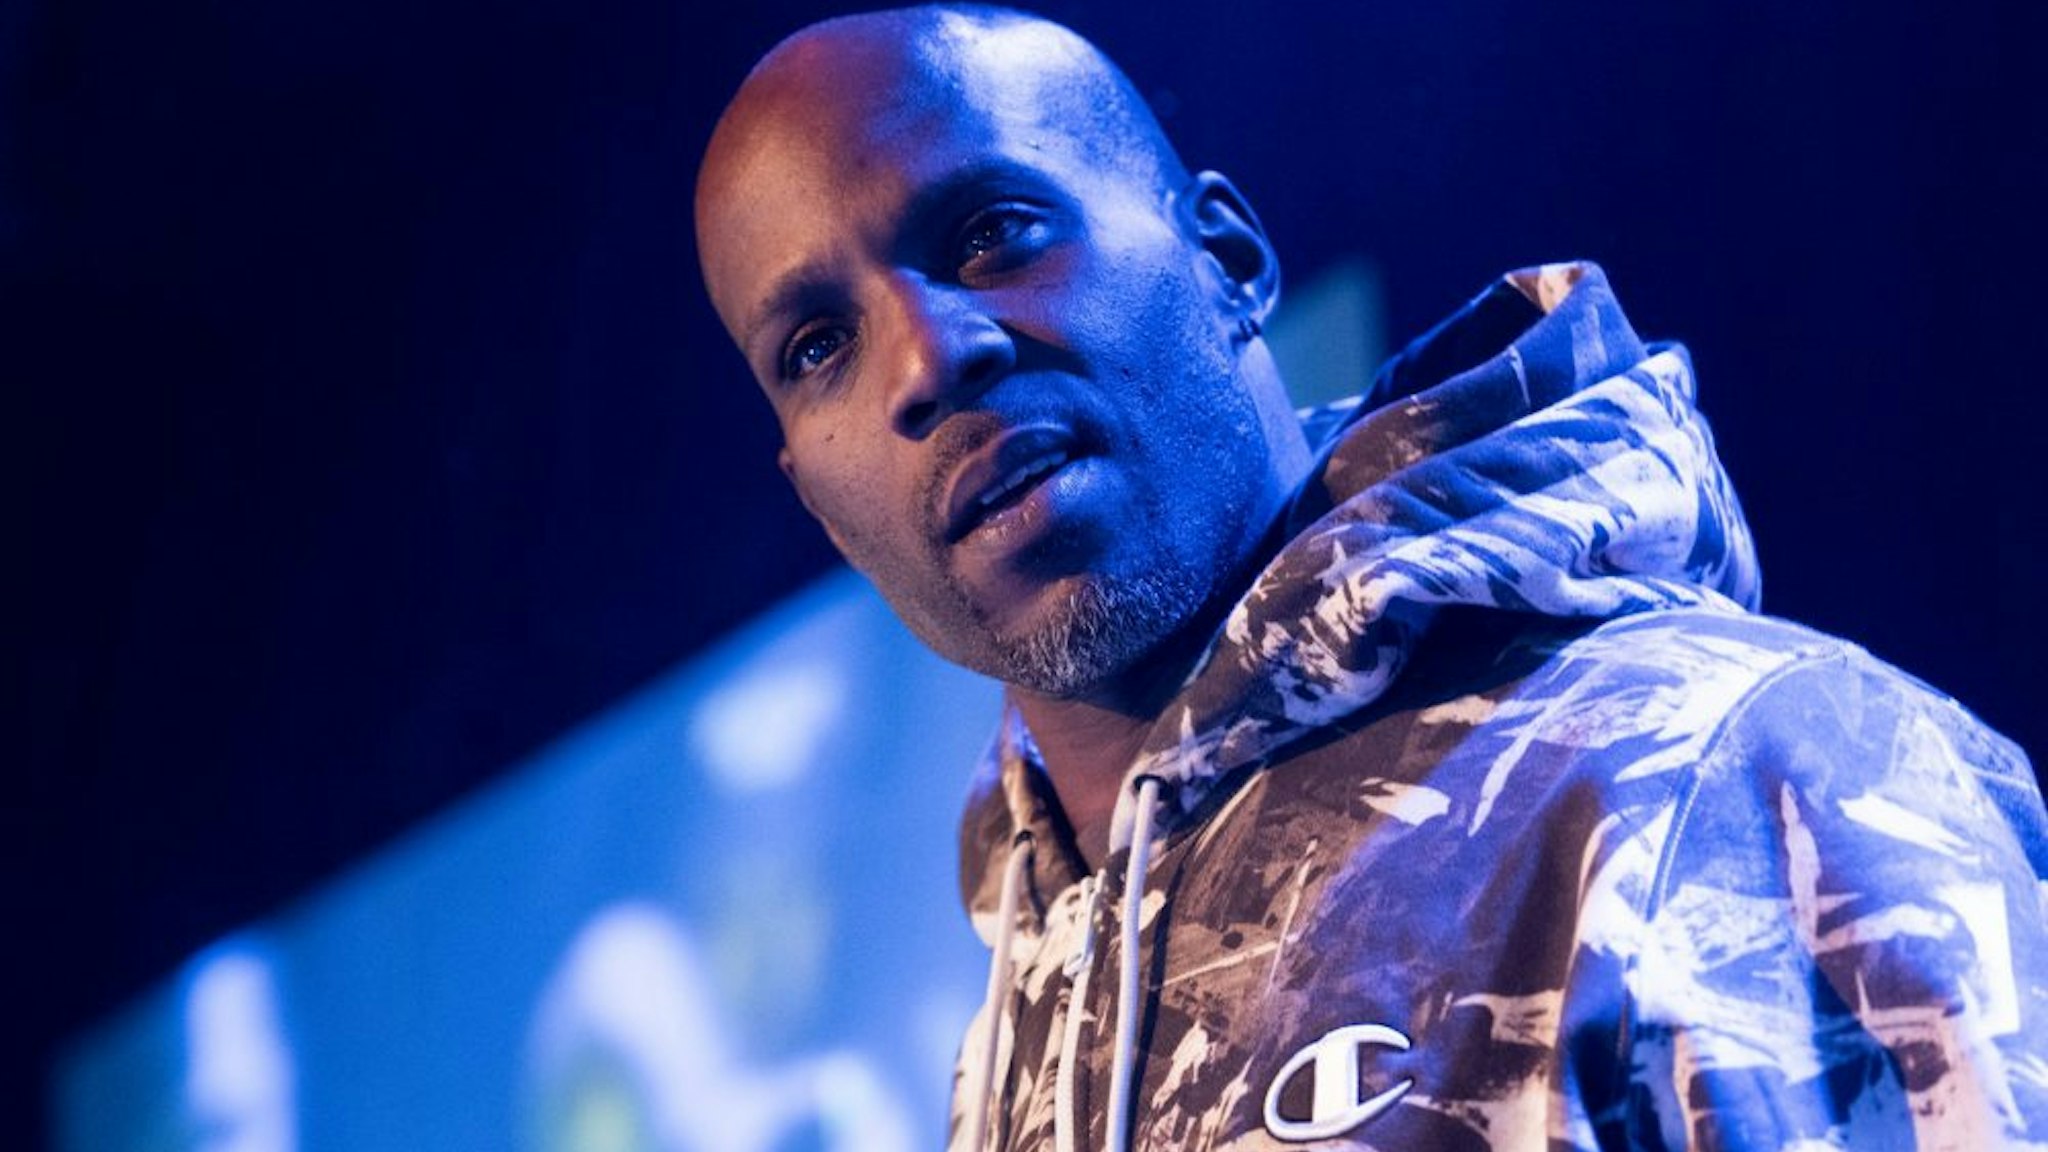 NEW YORK, NEW YORK - MARCH 27: Rapper DMX performs in concert at B.B. King Blues Club &amp; Grill on March 27, 2016 in New York City.